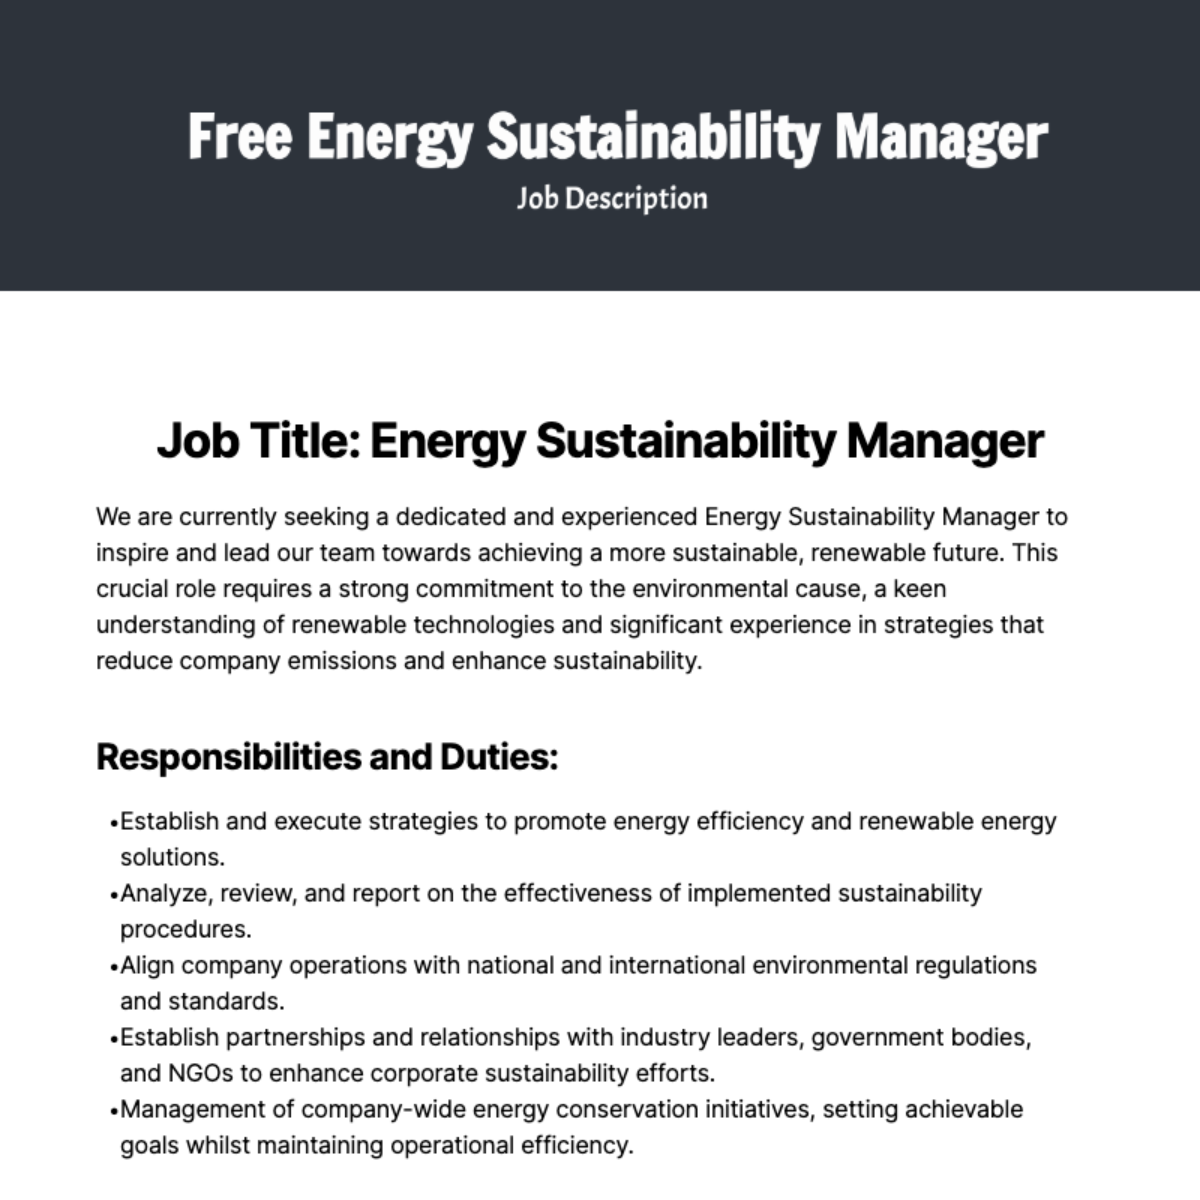 Free Energy Sustainability Manager Job Description Template